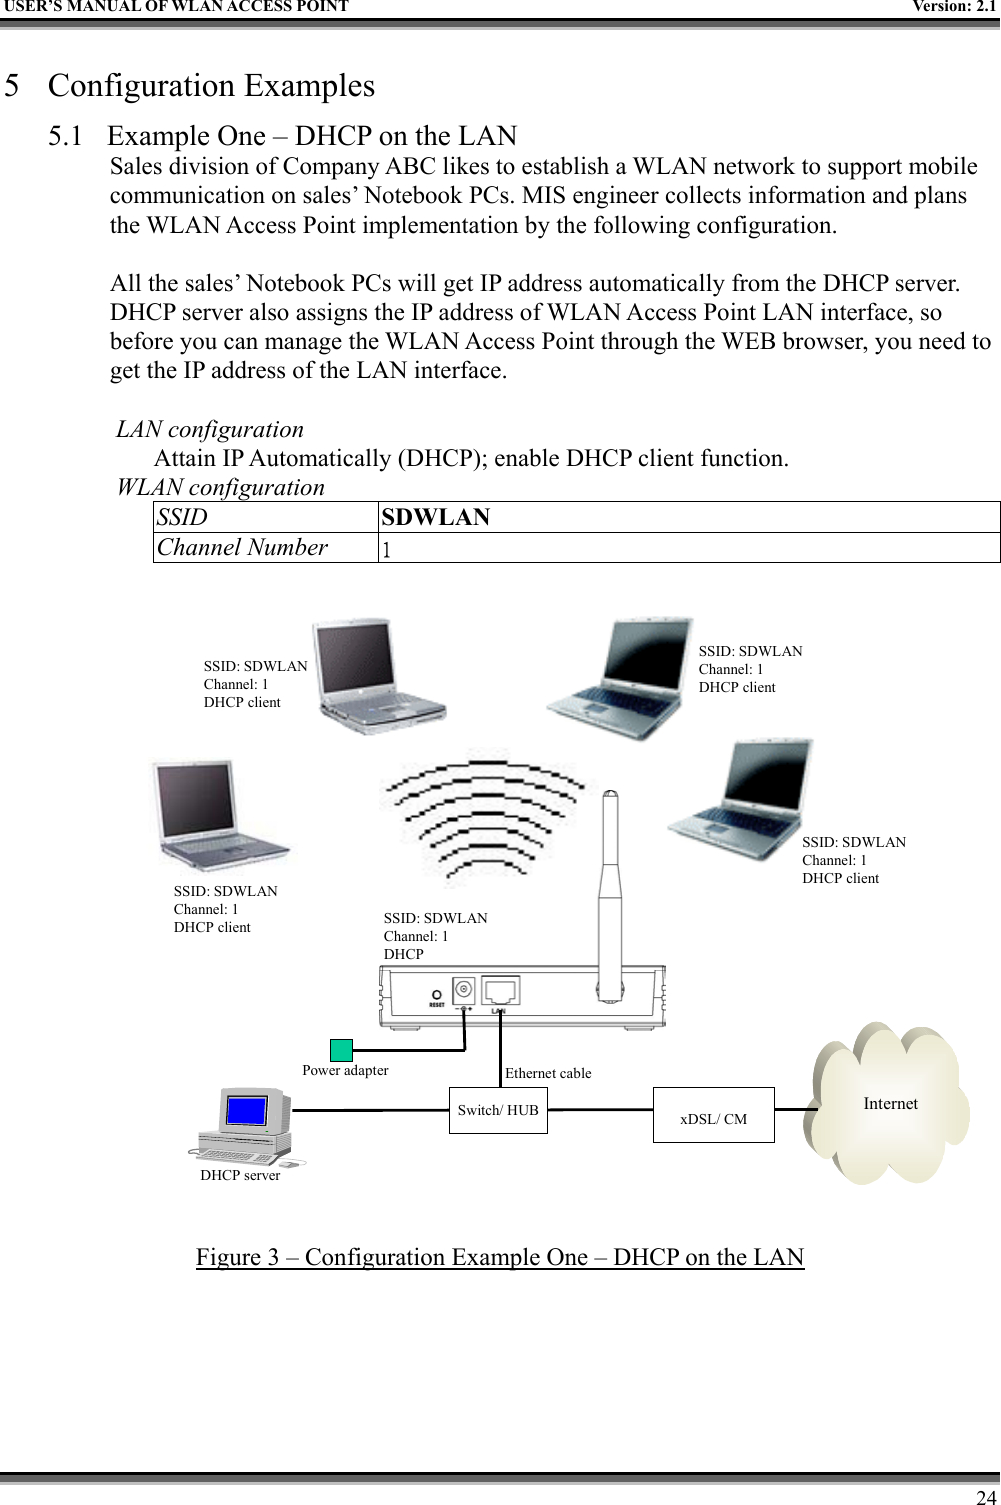   USER’S MANUAL OF WLAN ACCESS POINT    Version: 2.1     24 5 Configuration Examples 5.1  Example One – DHCP on the LAN Sales division of Company ABC likes to establish a WLAN network to support mobile communication on sales’ Notebook PCs. MIS engineer collects information and plans the WLAN Access Point implementation by the following configuration.  All the sales’ Notebook PCs will get IP address automatically from the DHCP server. DHCP server also assigns the IP address of WLAN Access Point LAN interface, so before you can manage the WLAN Access Point through the WEB browser, you need to get the IP address of the LAN interface.  LAN configuration Attain IP Automatically (DHCP); enable DHCP client function. WLAN configuration SSID  SDWLAN Channel Number  1 InternetxDSL/ CMPower adapter Ethernet cableSSID: SDWLANChannel: 1 DHCP clientSSID: SDWLANChannel: 1 DHCP clientSSID: SDWLANChannel: 1 DHCP clientSSID: SDWLANChannel: 1 DHCP client SSID: SDWLANChannel: 1DHCPDHCP serverSwitch/ HUB Figure 3 – Configuration Example One – DHCP on the LAN 